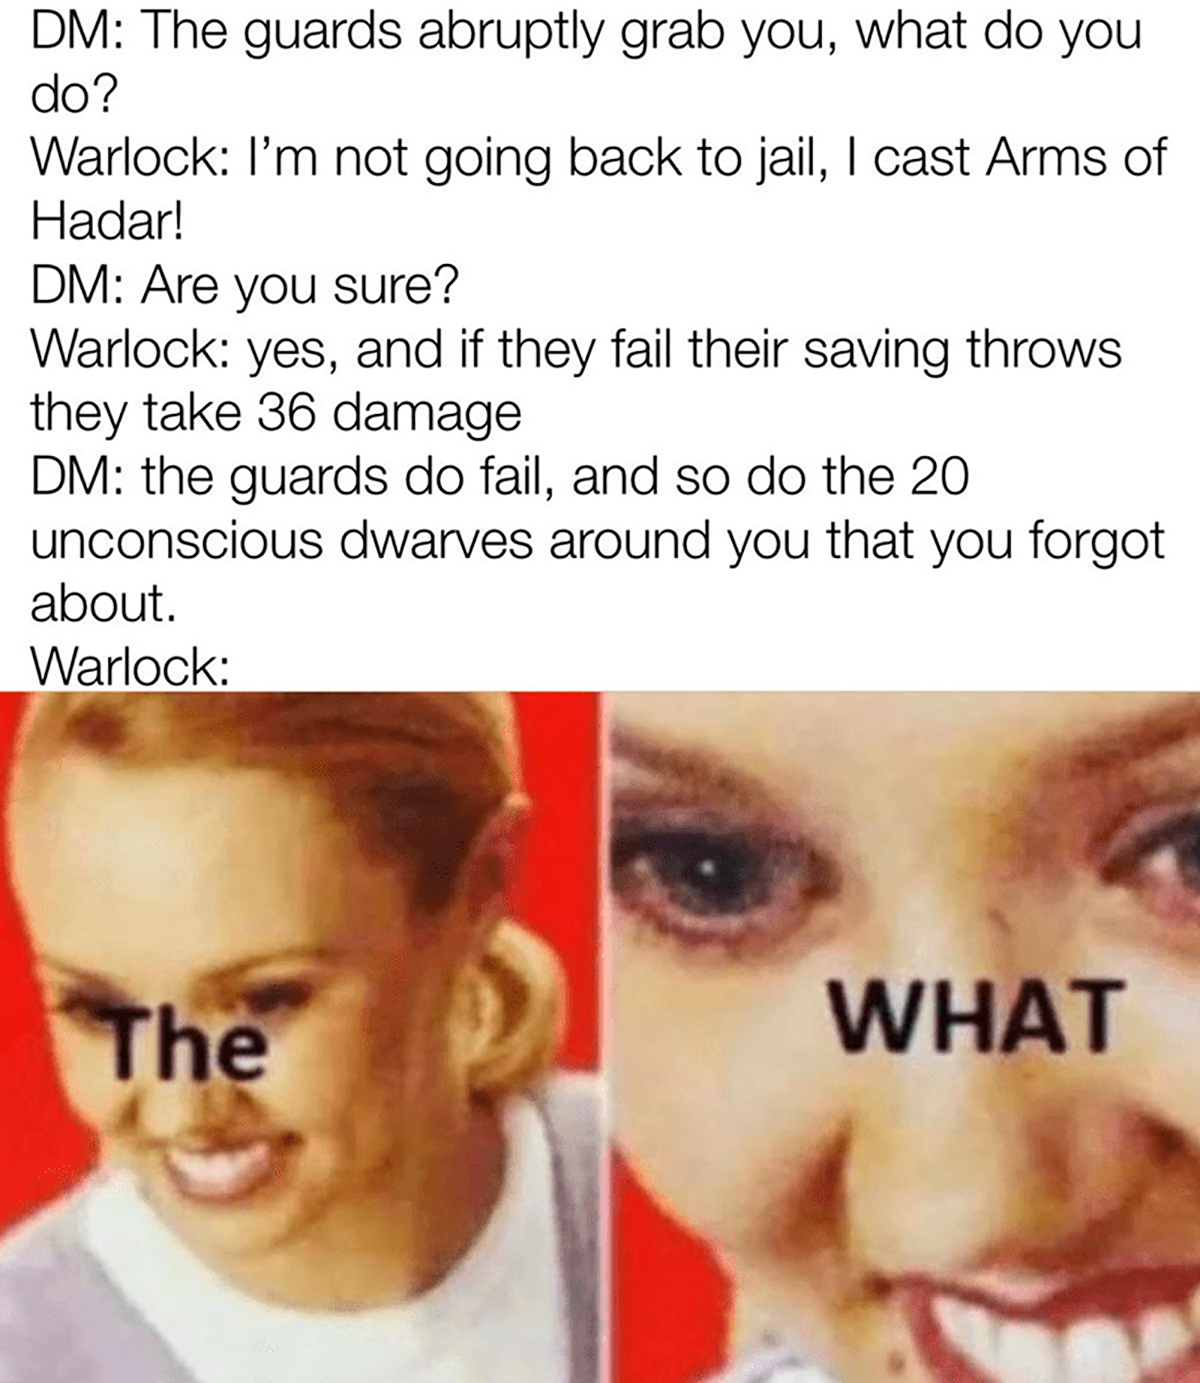 fresh memes - funny warlock dnd memes - Dm The guards abruptly grab you, what do you do? Warlock I'm not going back to jail, I cast Arms of Hadar! Dm Are you sure? Warlock yes, and if they fail their saving throws they take 36 damage Dm the guards do fail